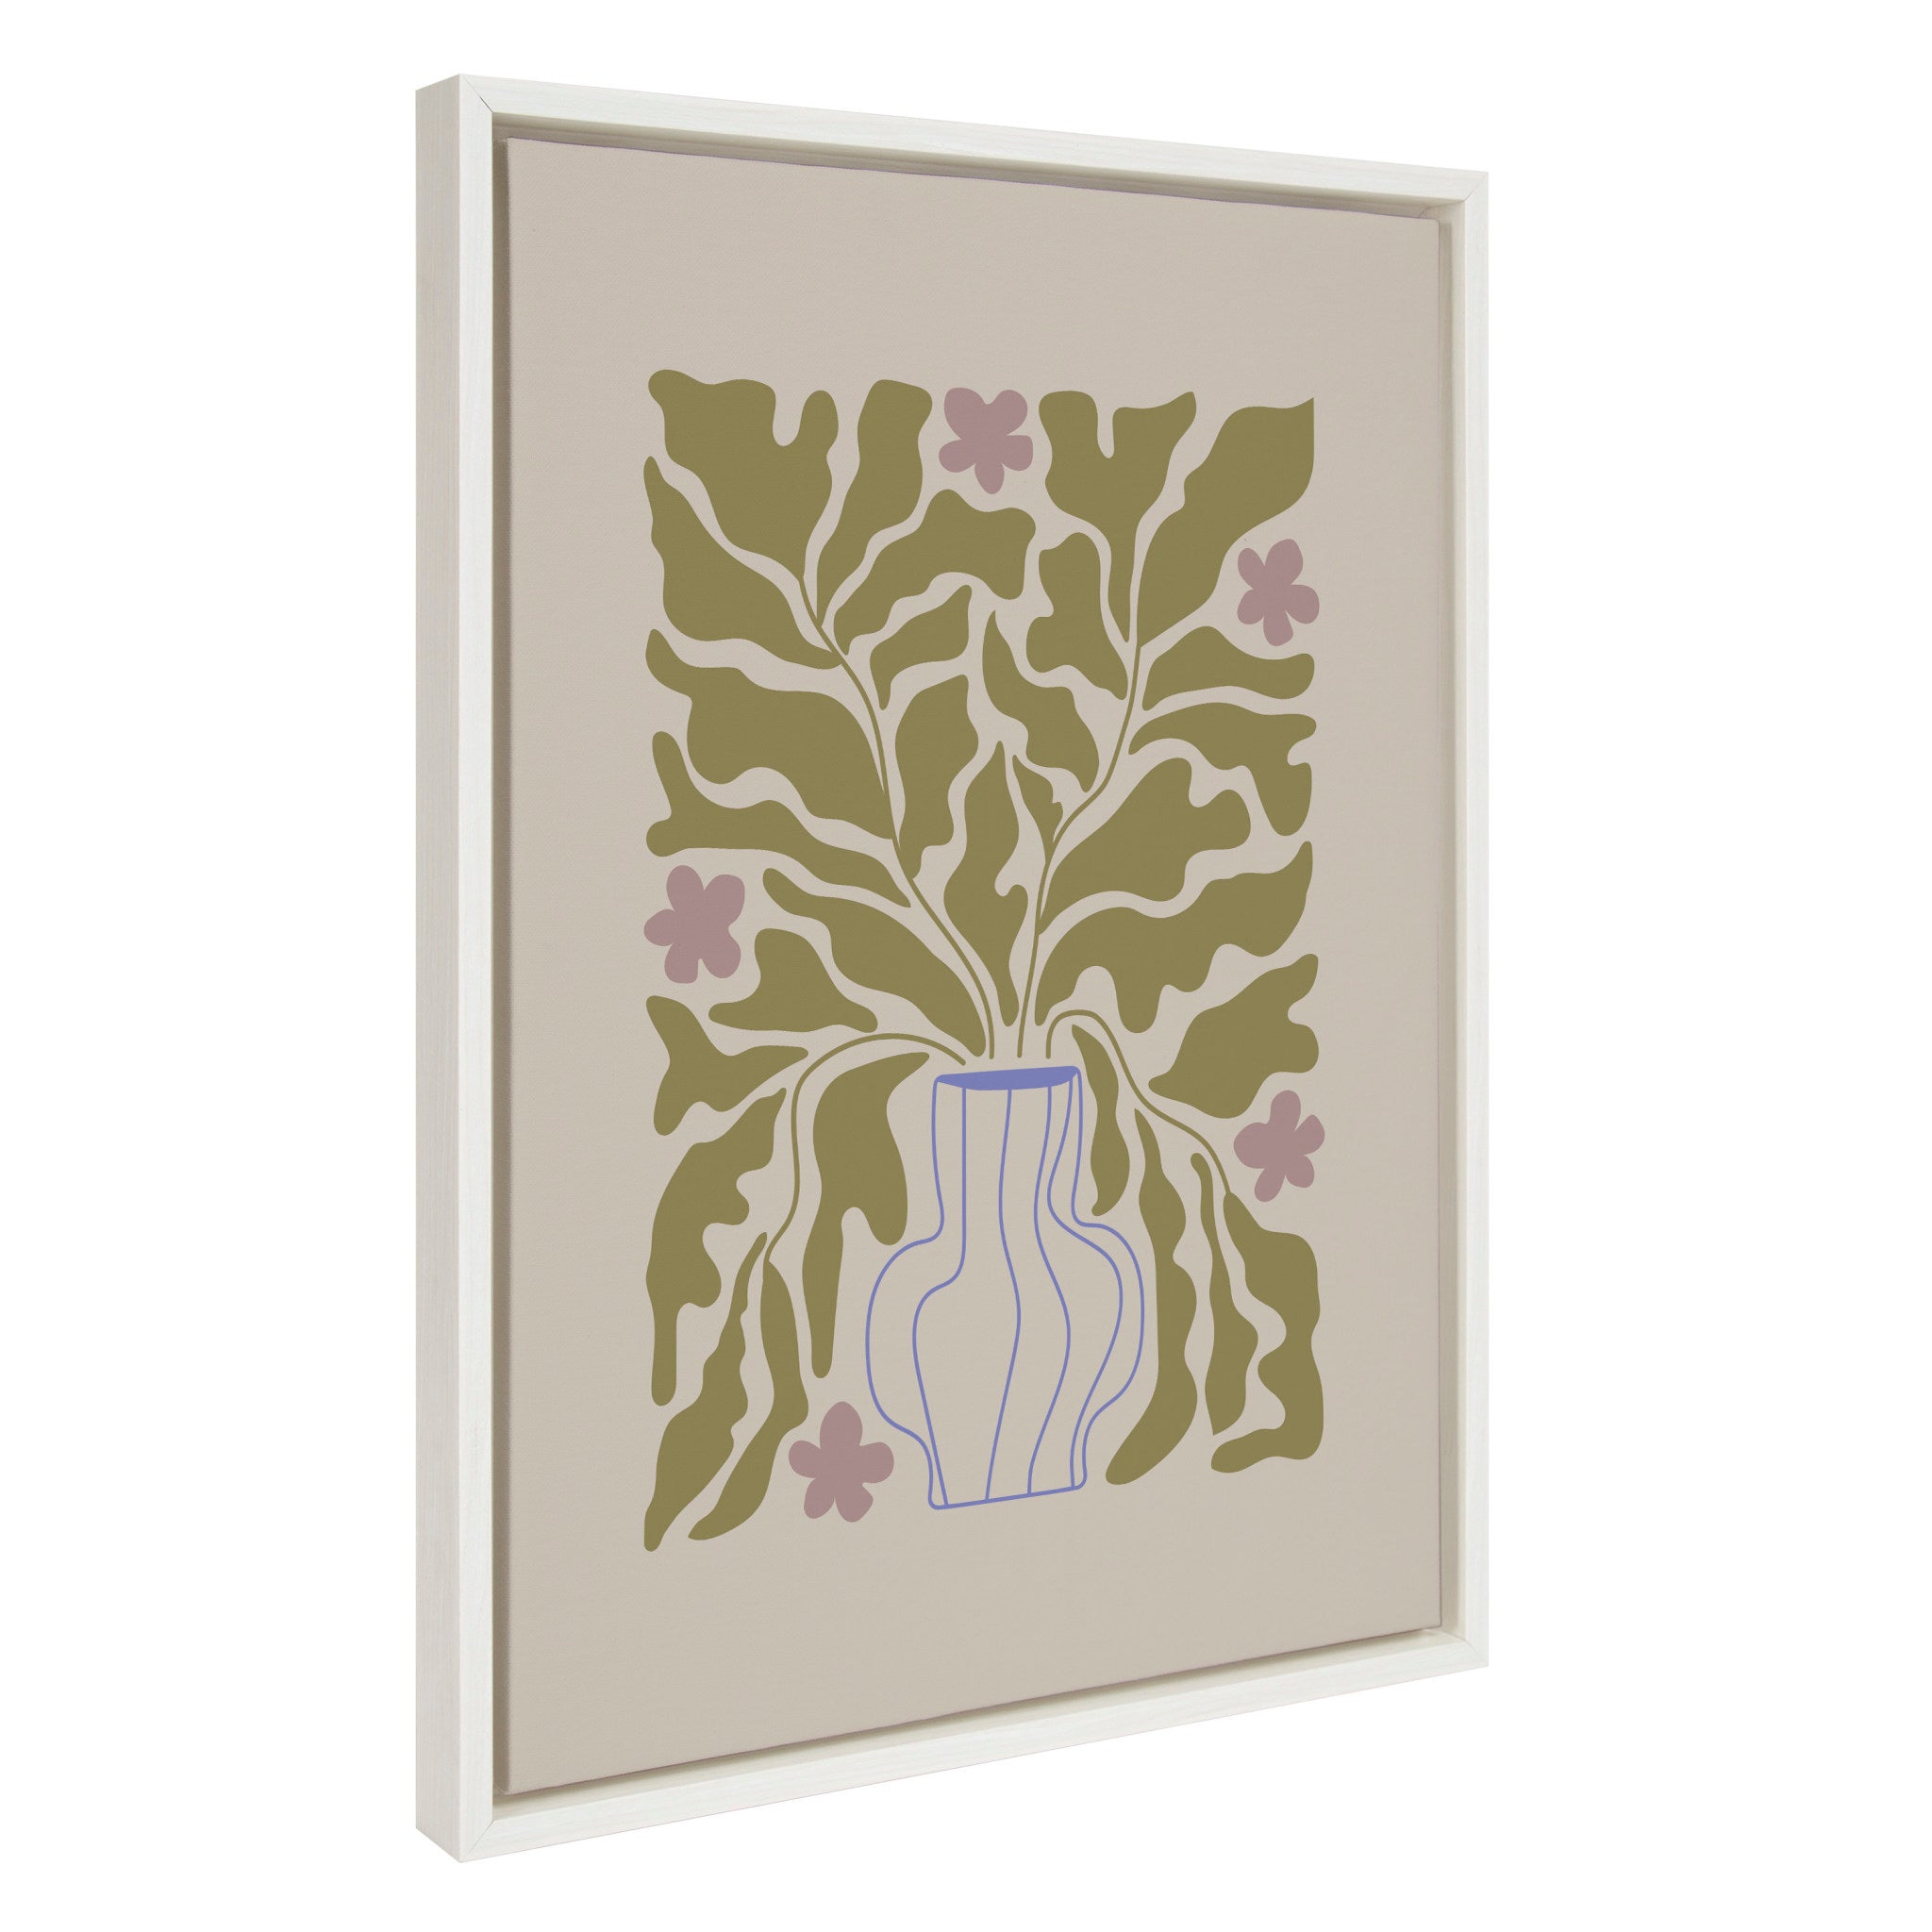 Sylvie Colorful Abstract Retro Floral Blue Vase Framed Canvas by The Creative Bunch Studio